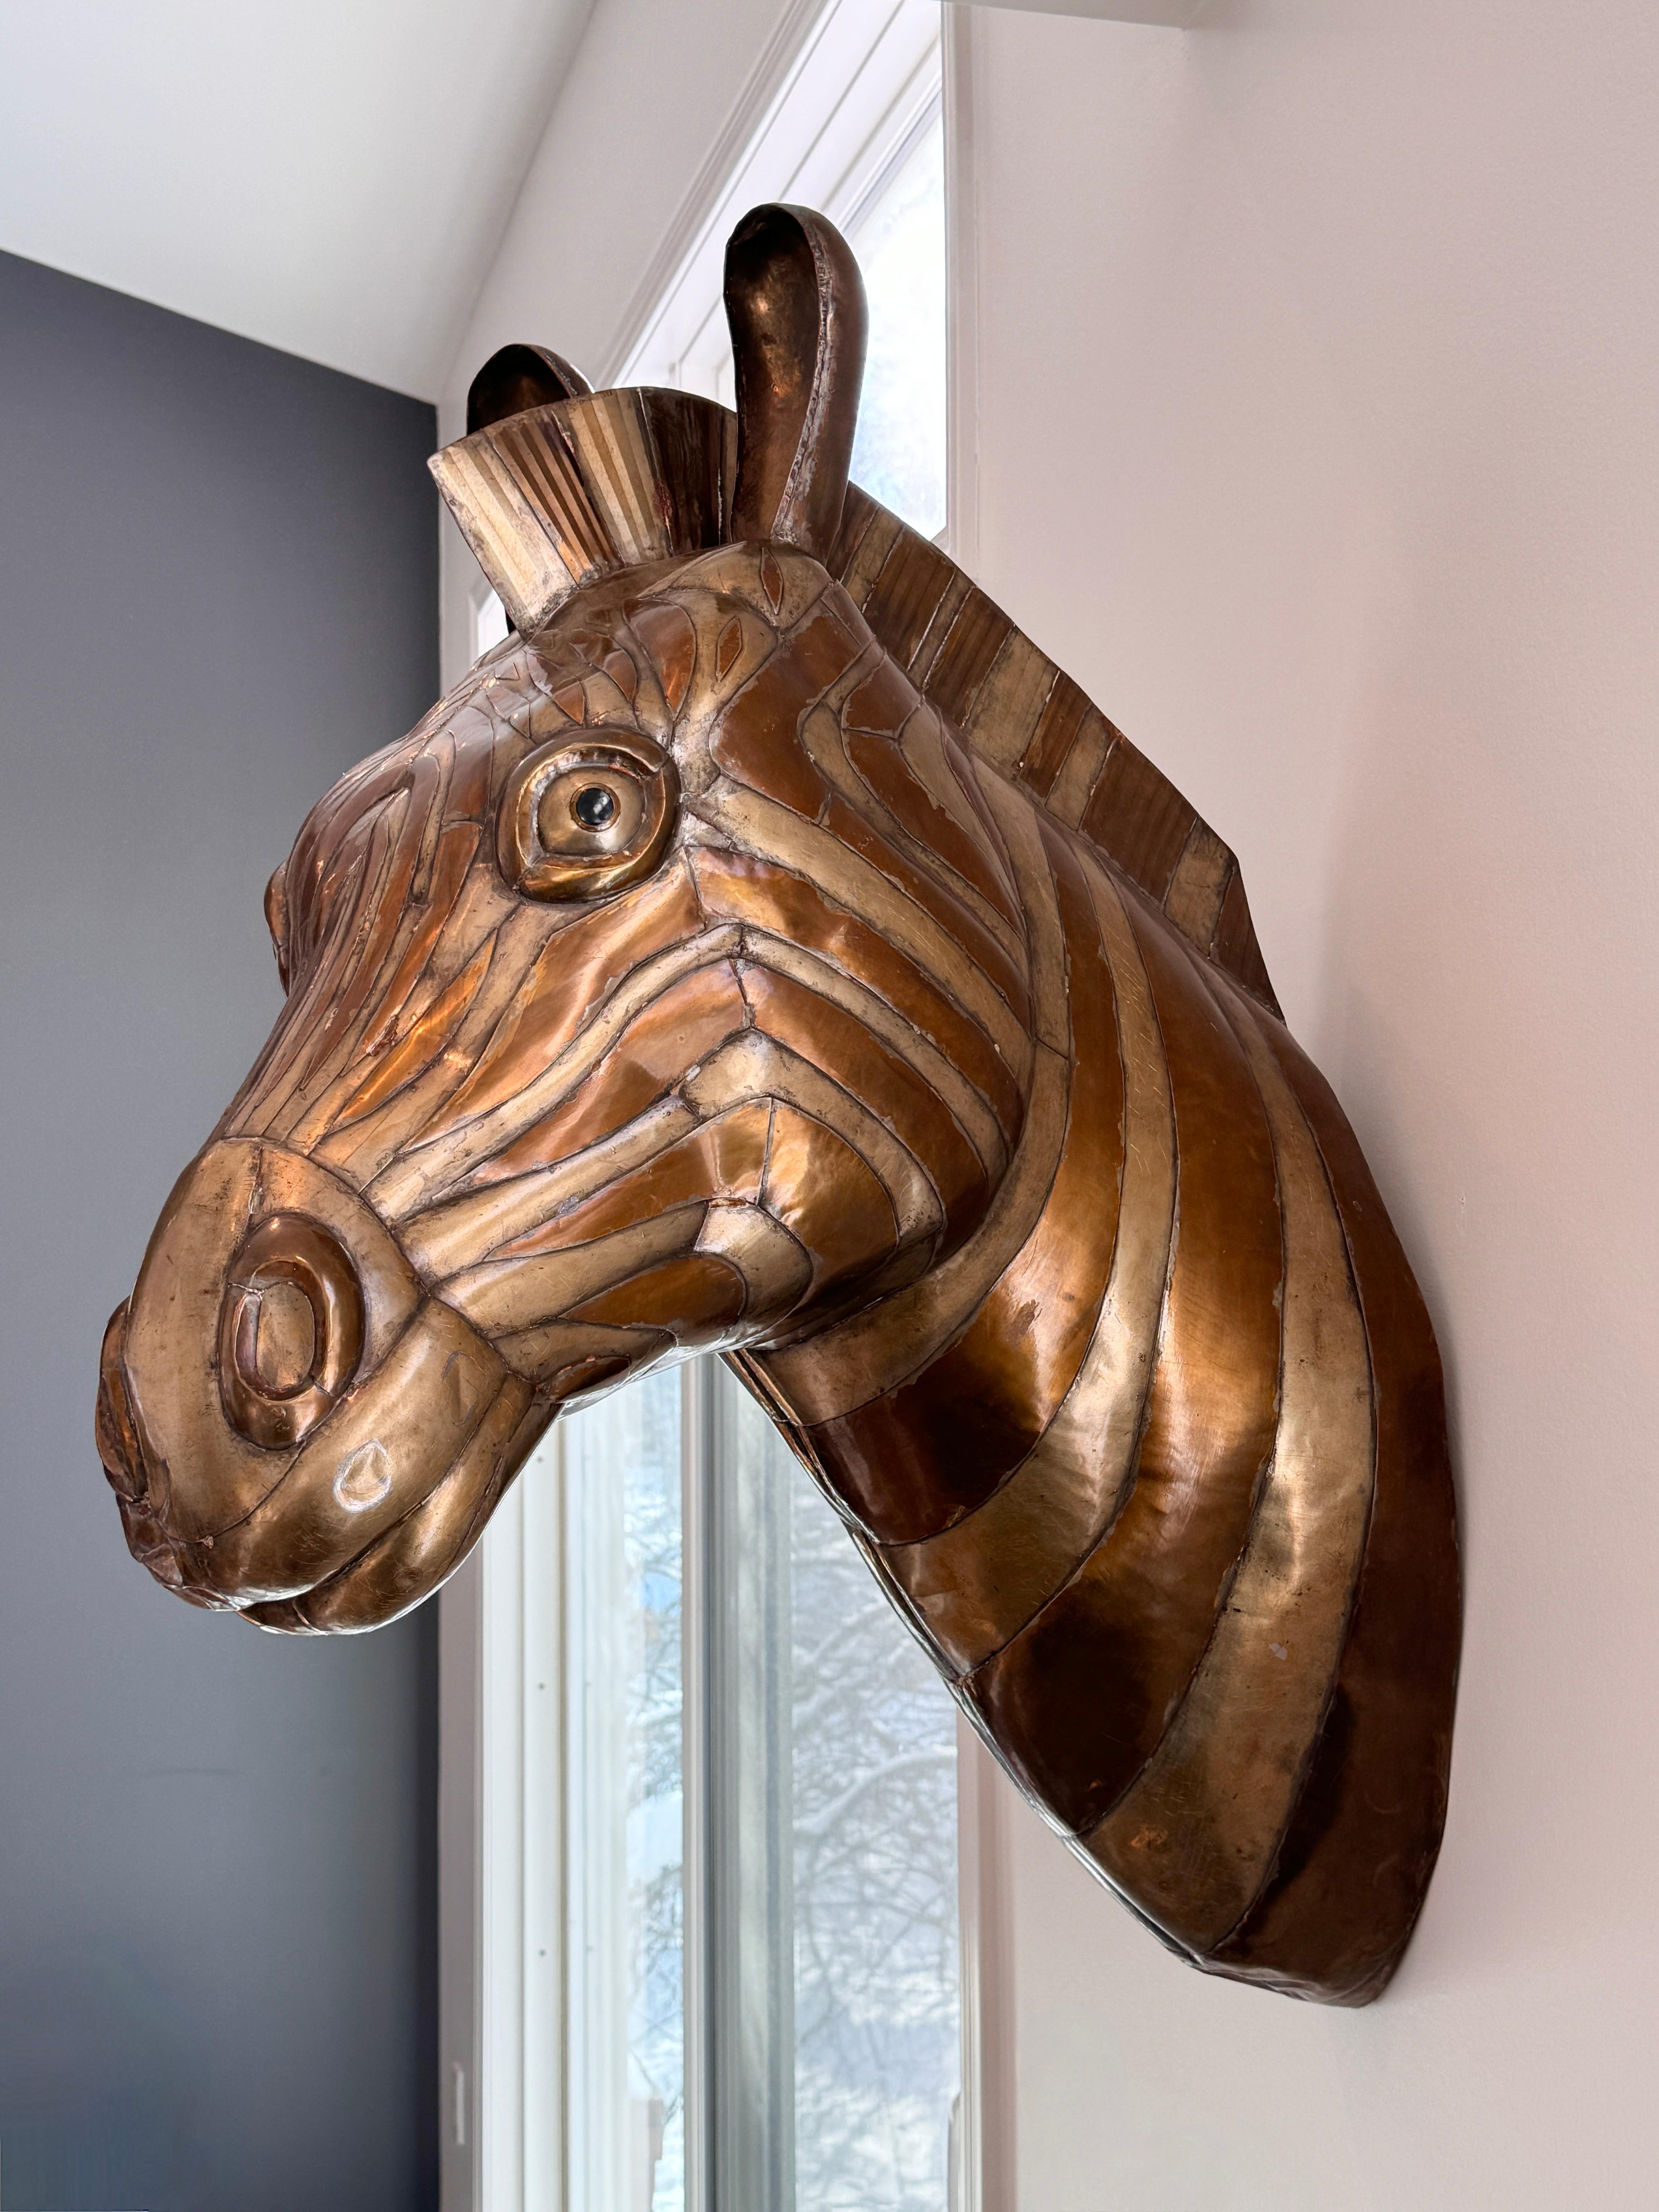 A signed Sergio Bustamante mixed metal wall sculpture circa 1970s

Zebra head mount formed of brass and copper with charming character and detail
Signed and numbered 80/100

16 inches wide
24 inches deep
32 inches in height
